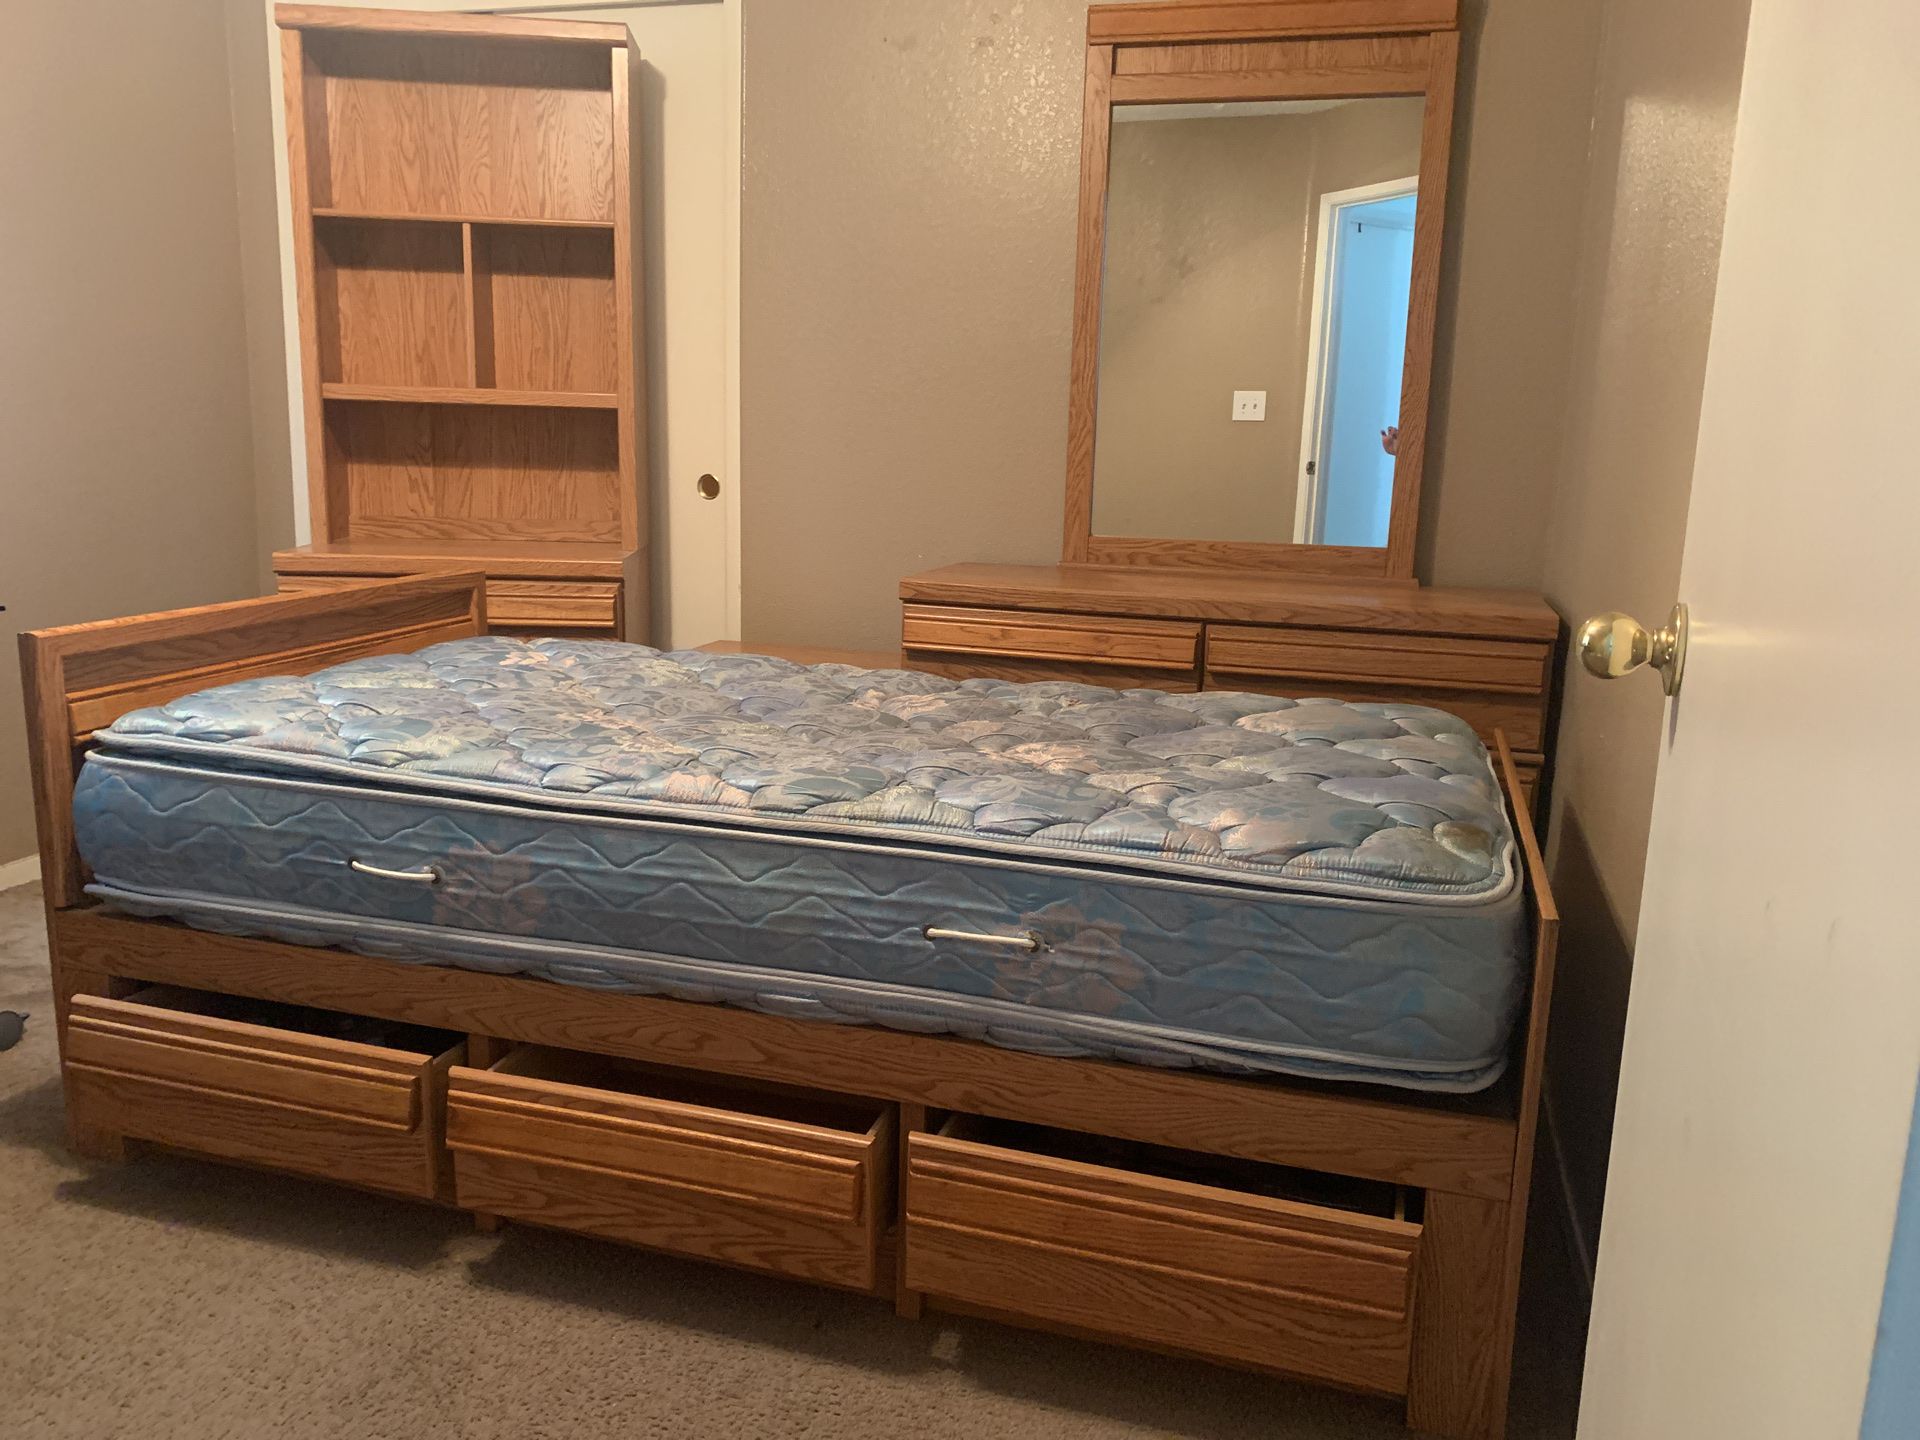 Twin bedroom set (Bed with storage, mattress, dresser and mirror, lamp table, and book shelf)